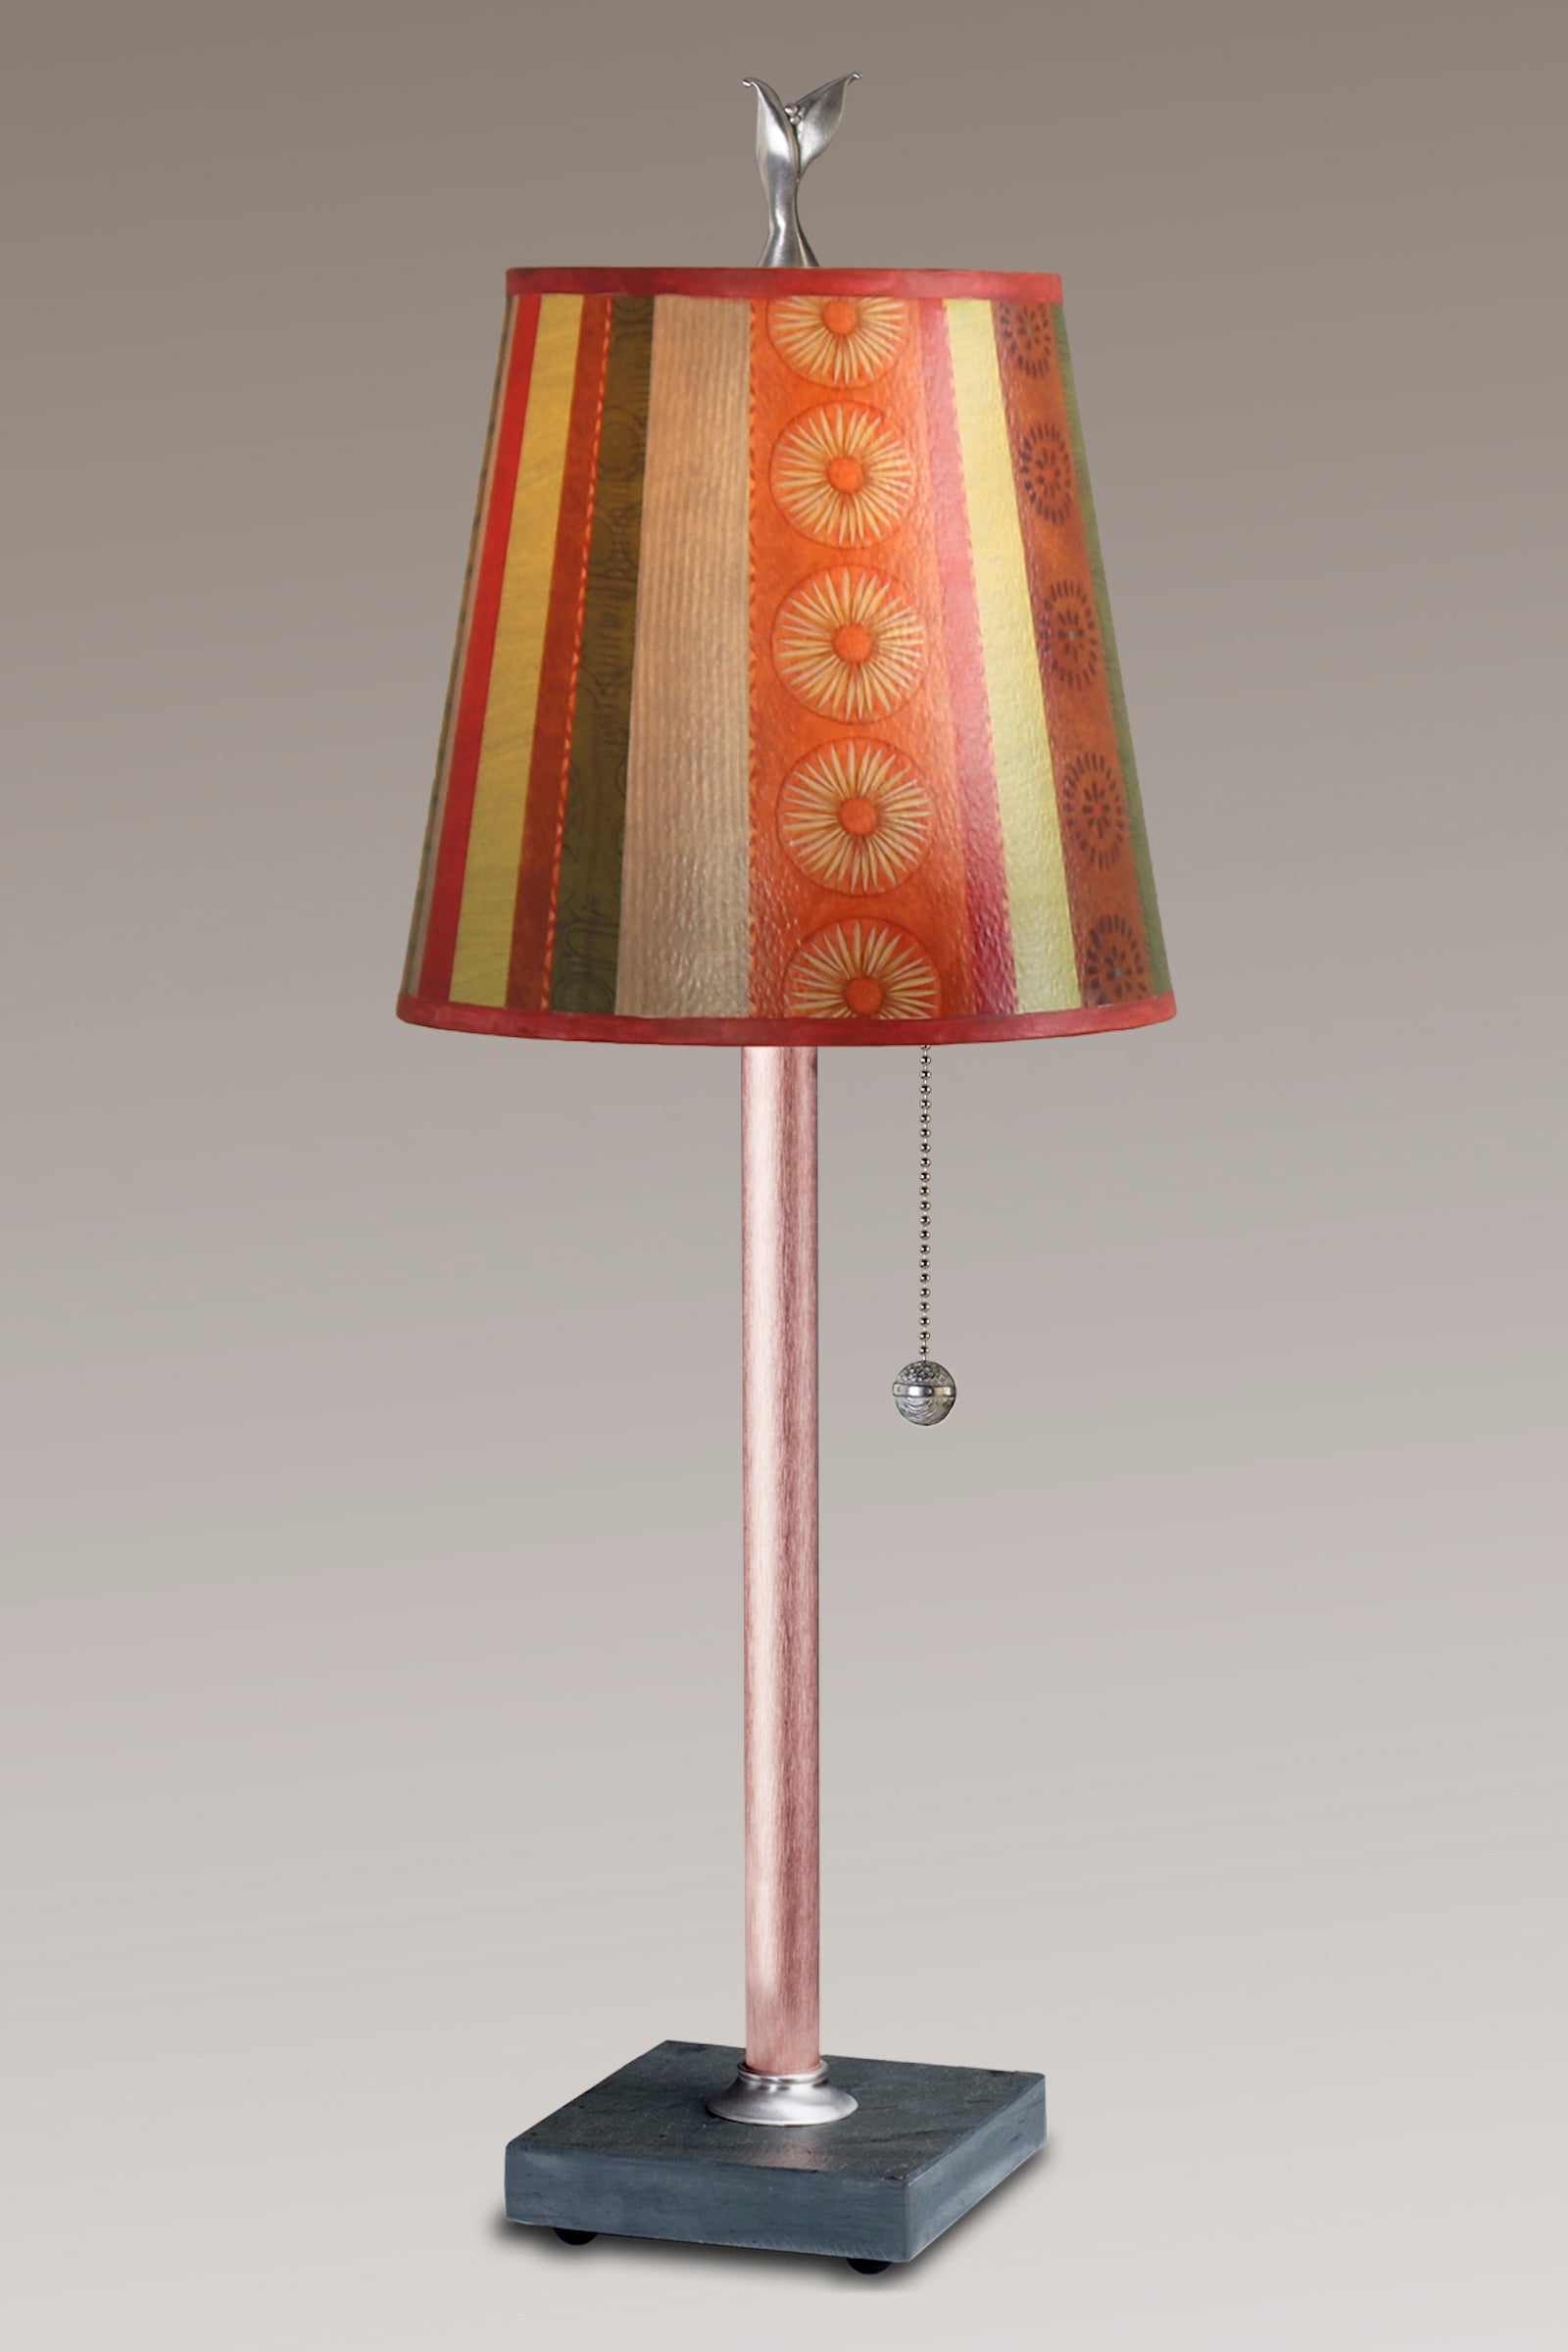 Janna Ugone & Co Table Lamps Copper Table Lamp with Small Drum Shade in Serape